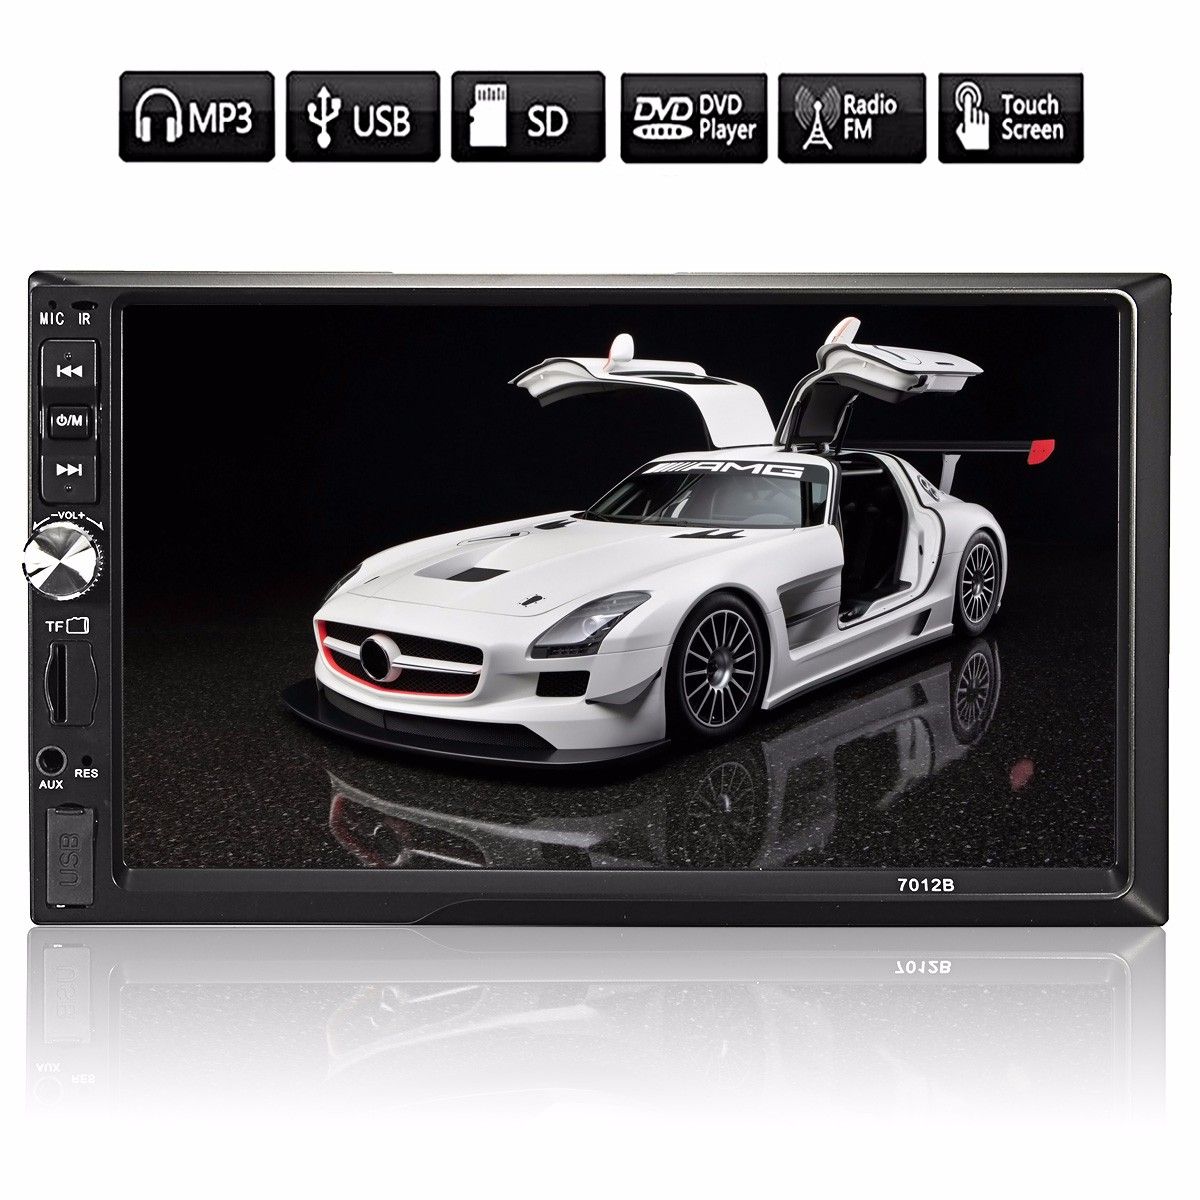 7012B-7inch-2DIN-Car-bluetooth-Touchscreen-MP3-MP4-MP5-Player-Video-Stereo-FM-Aux-Input-1029587